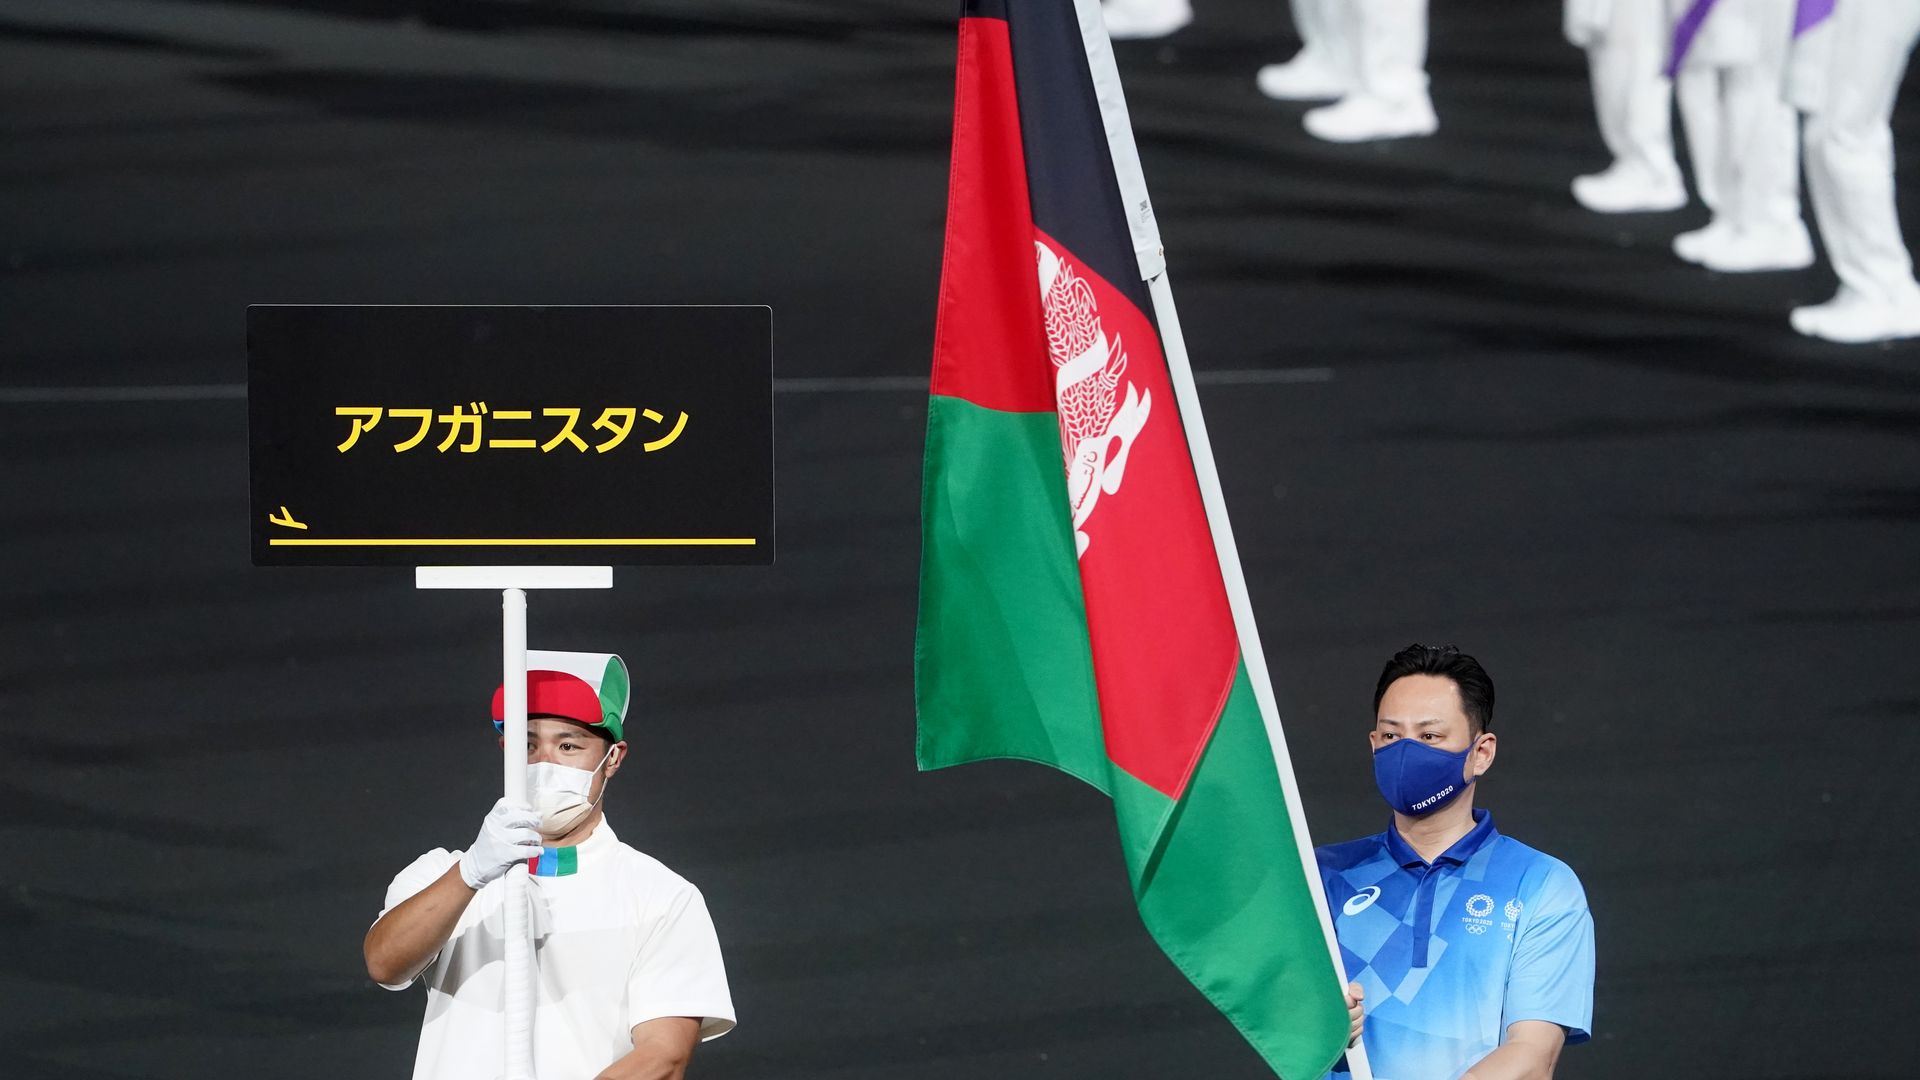 The flag of Afghanistan is presented by volunteers at the Paralympics.